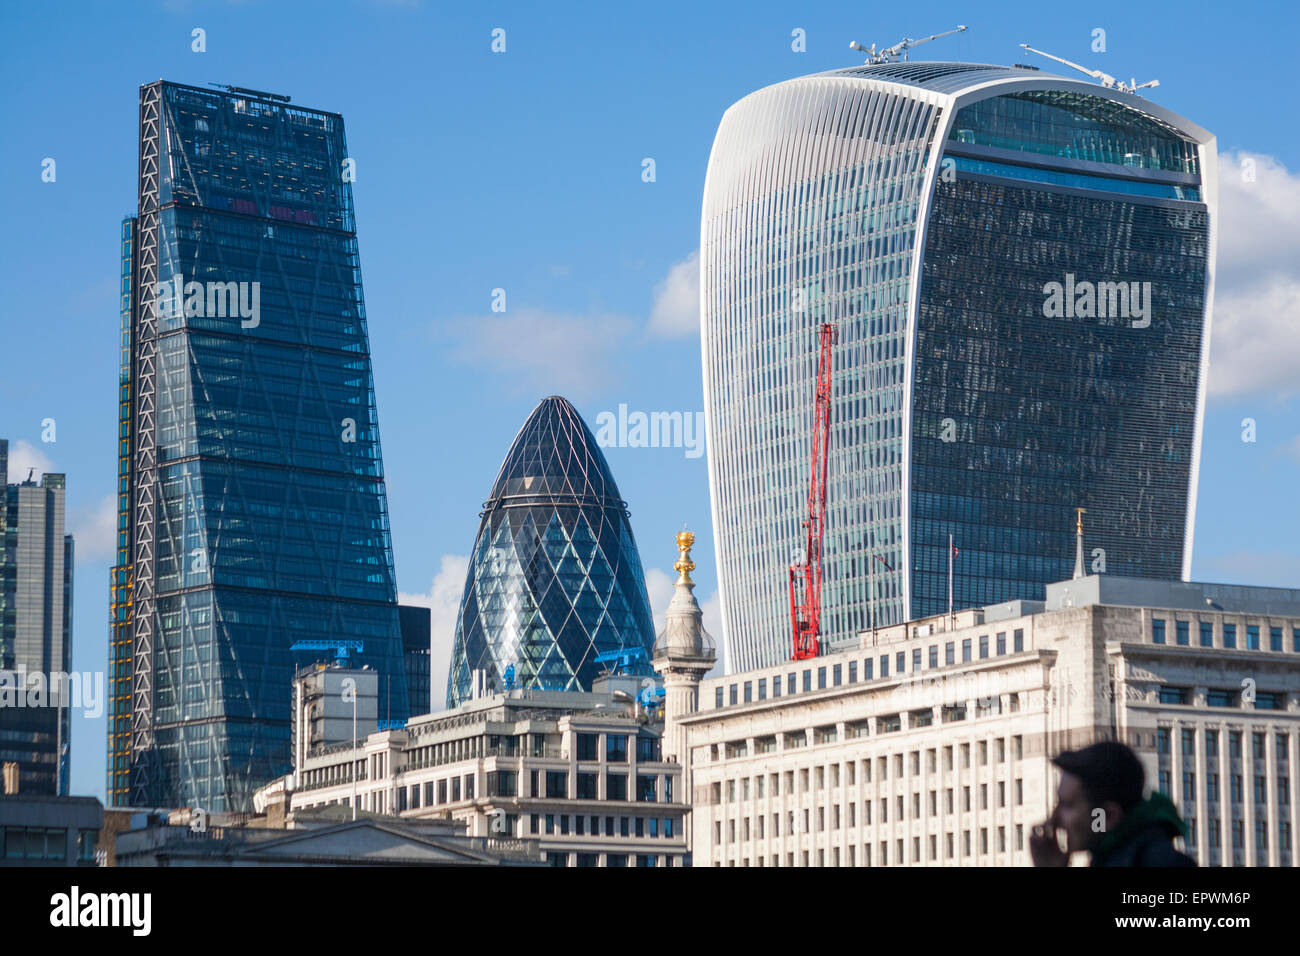 London skyline with Walkie Talkie, Gherkin and the Cheese Grater buildings, London Stock Photo